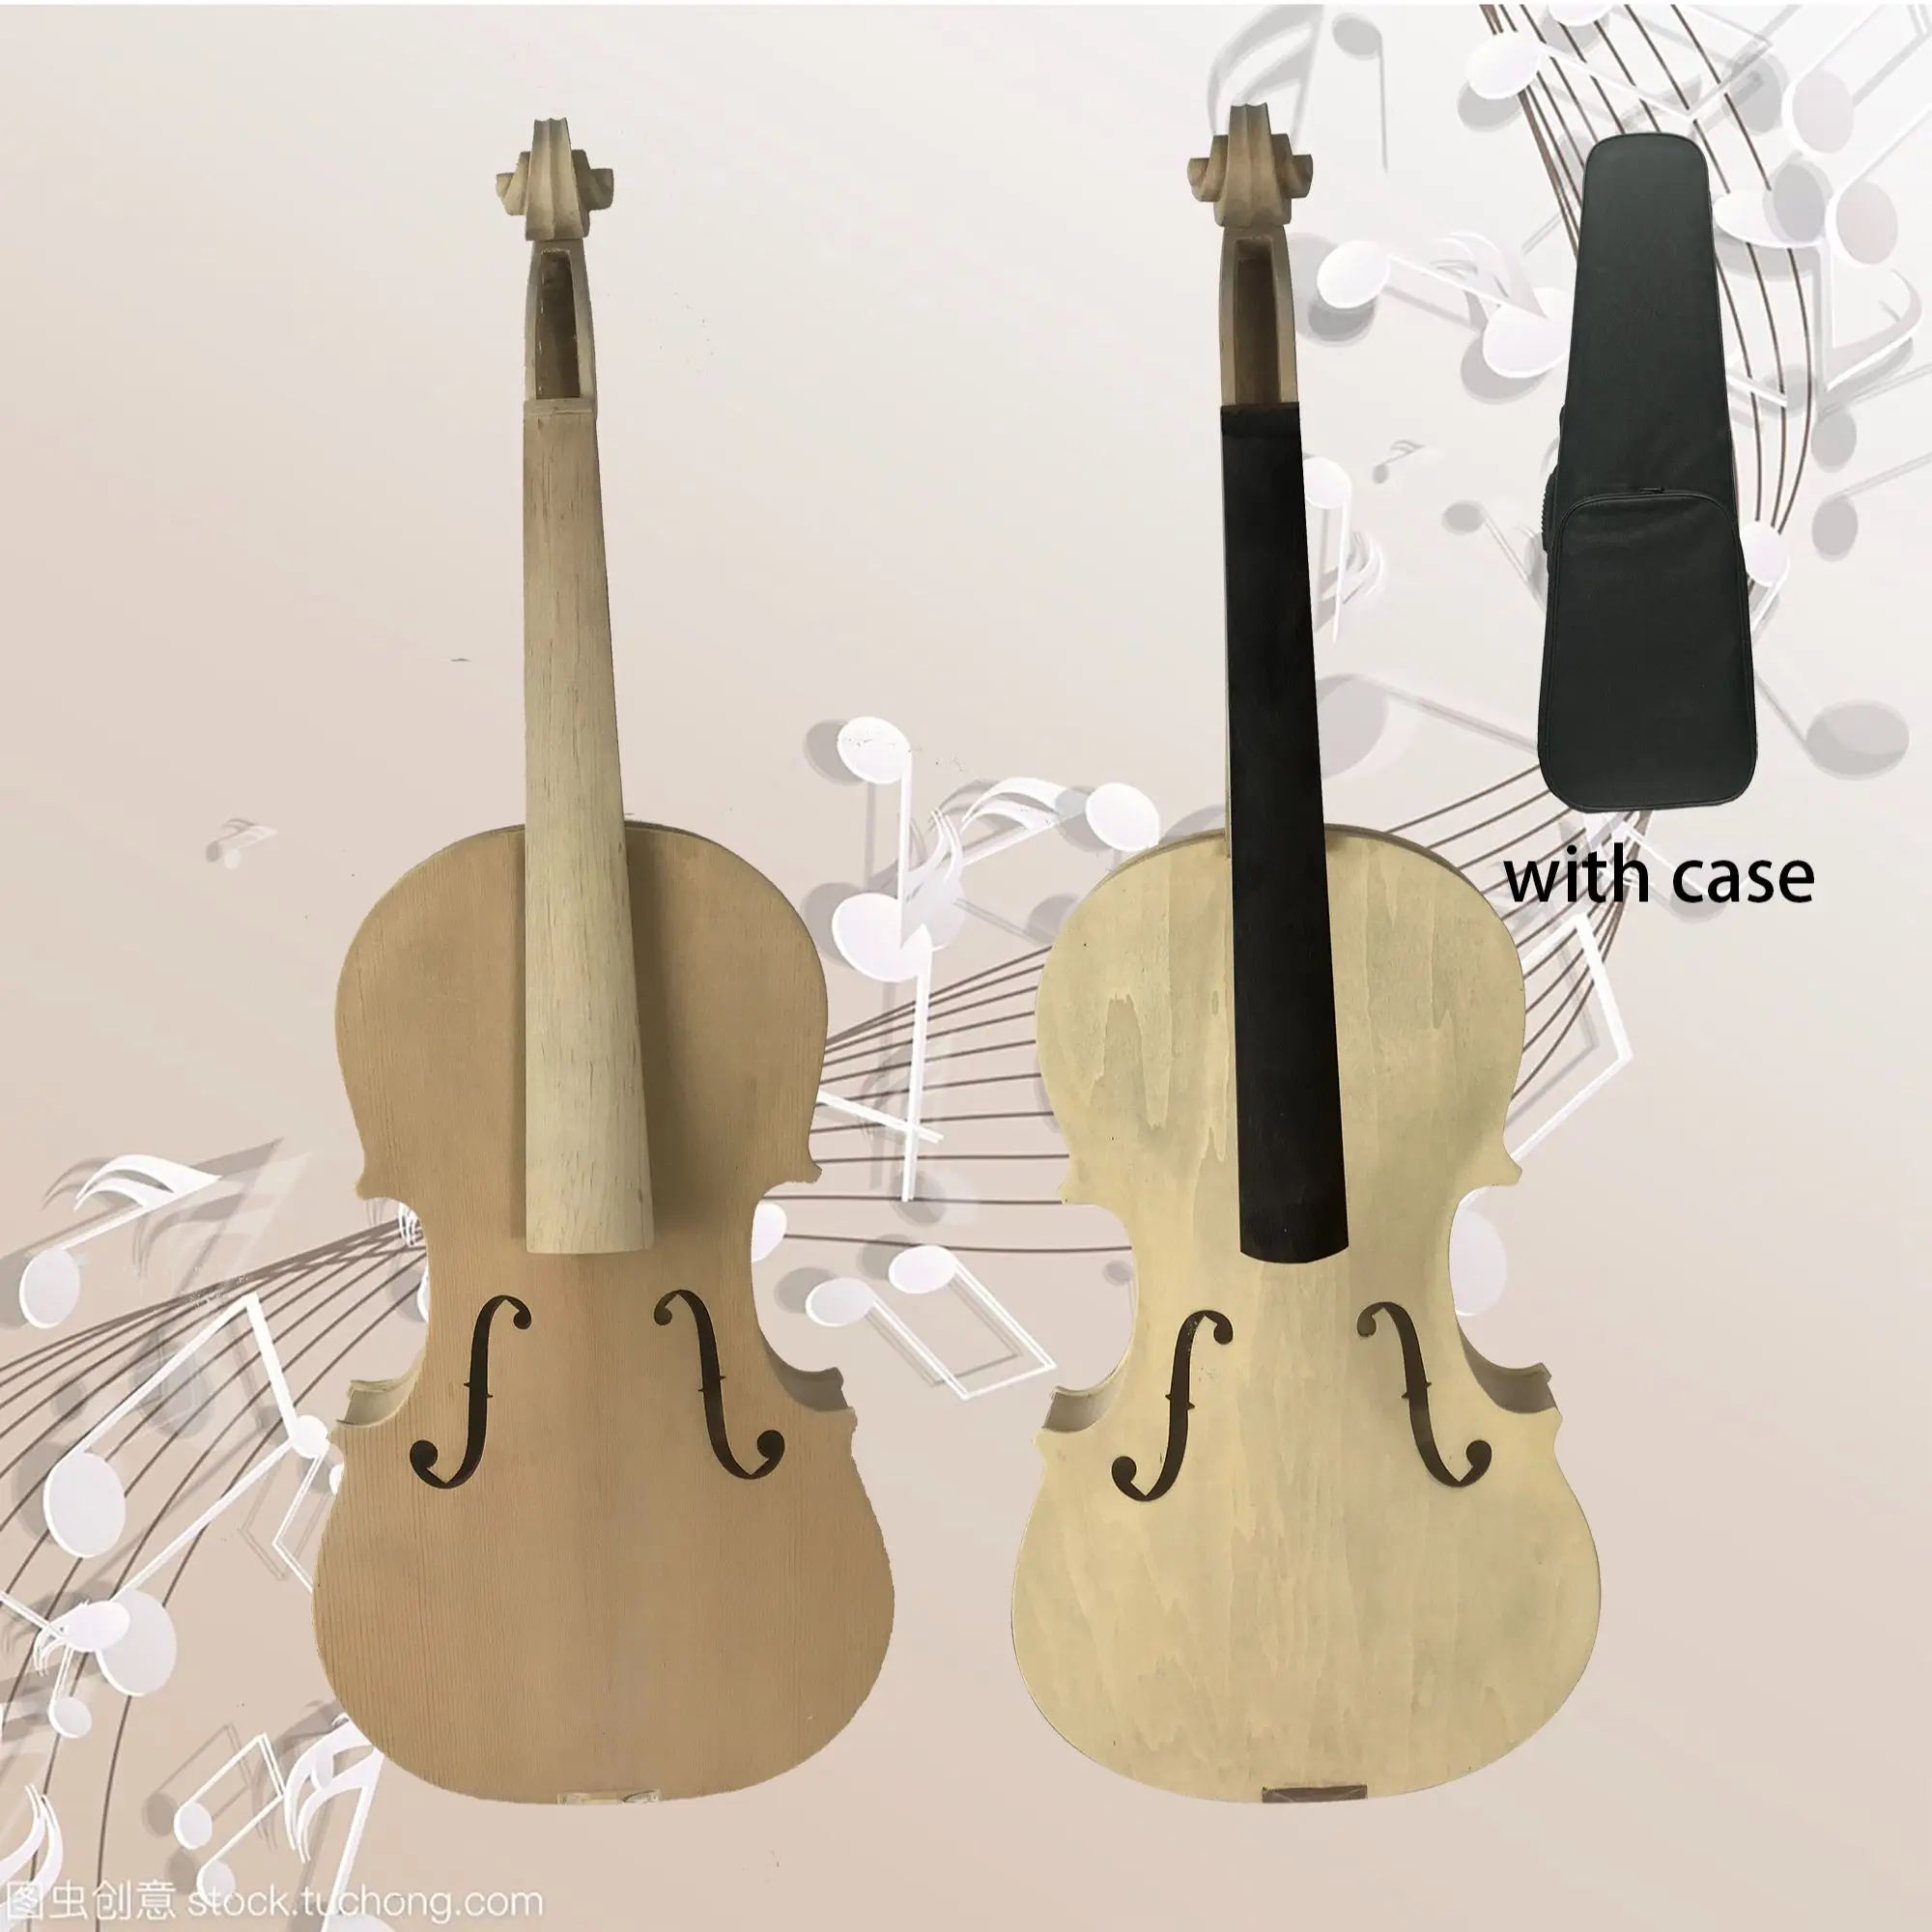 1 Pcs high quality Unfinished white violin 4/4 maple neck&body veneer wood spruce top maple back side without kit with hard case